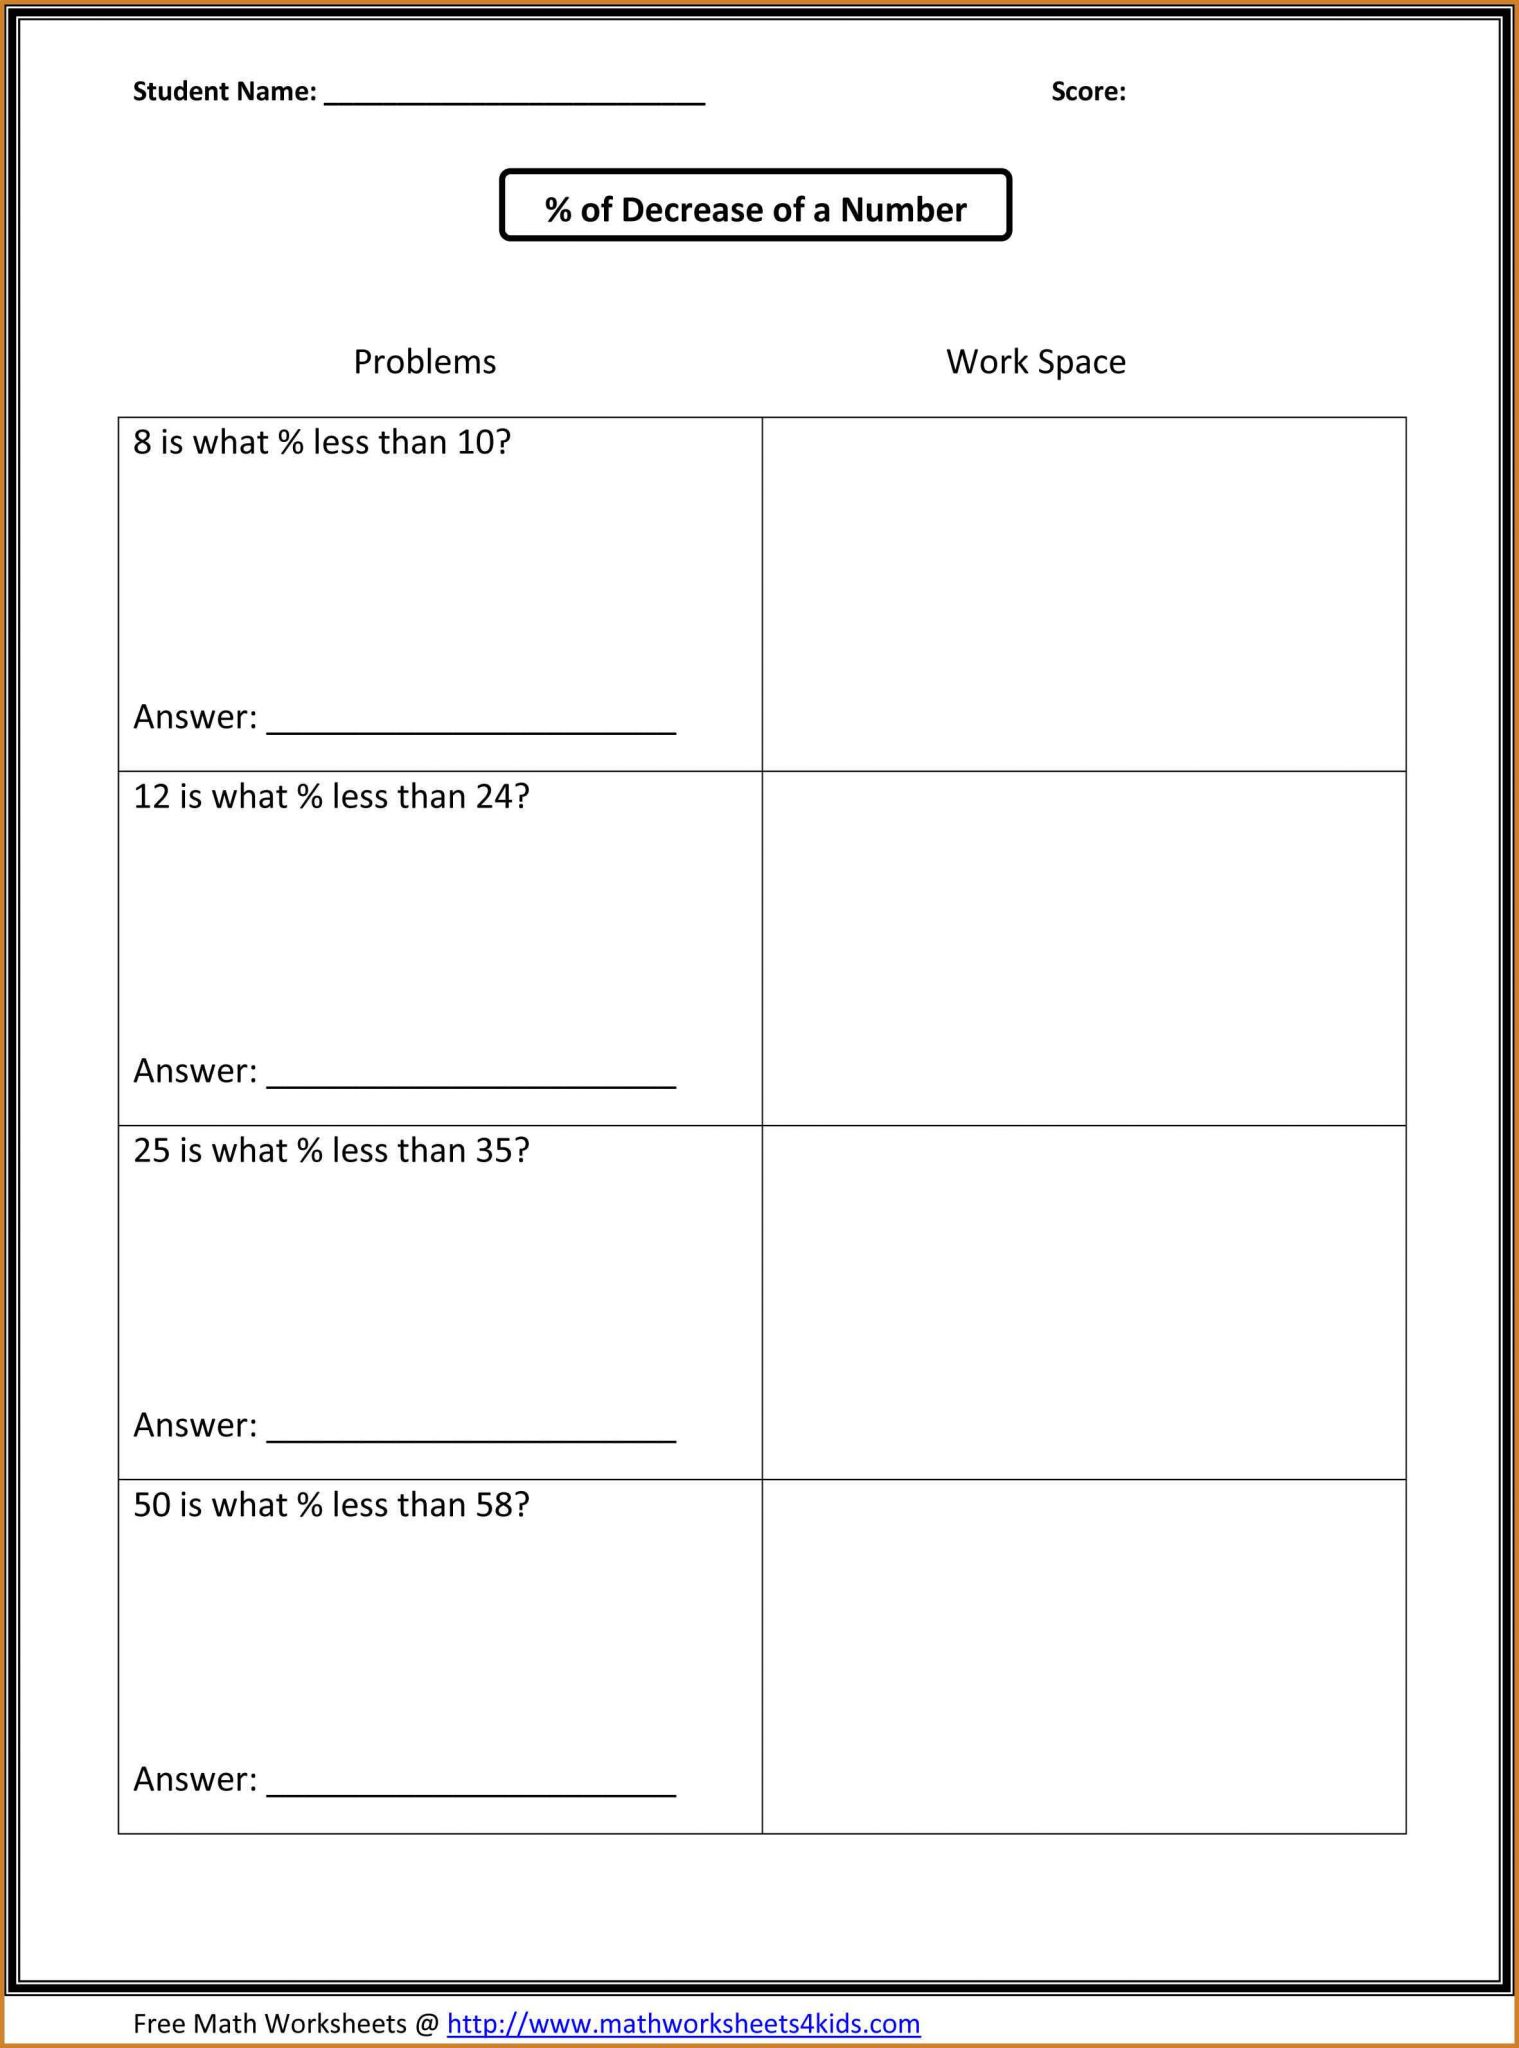 Maths Percentages Worksheets Along with Percent Increase and Decrease Worksheet 7th Grade the Best